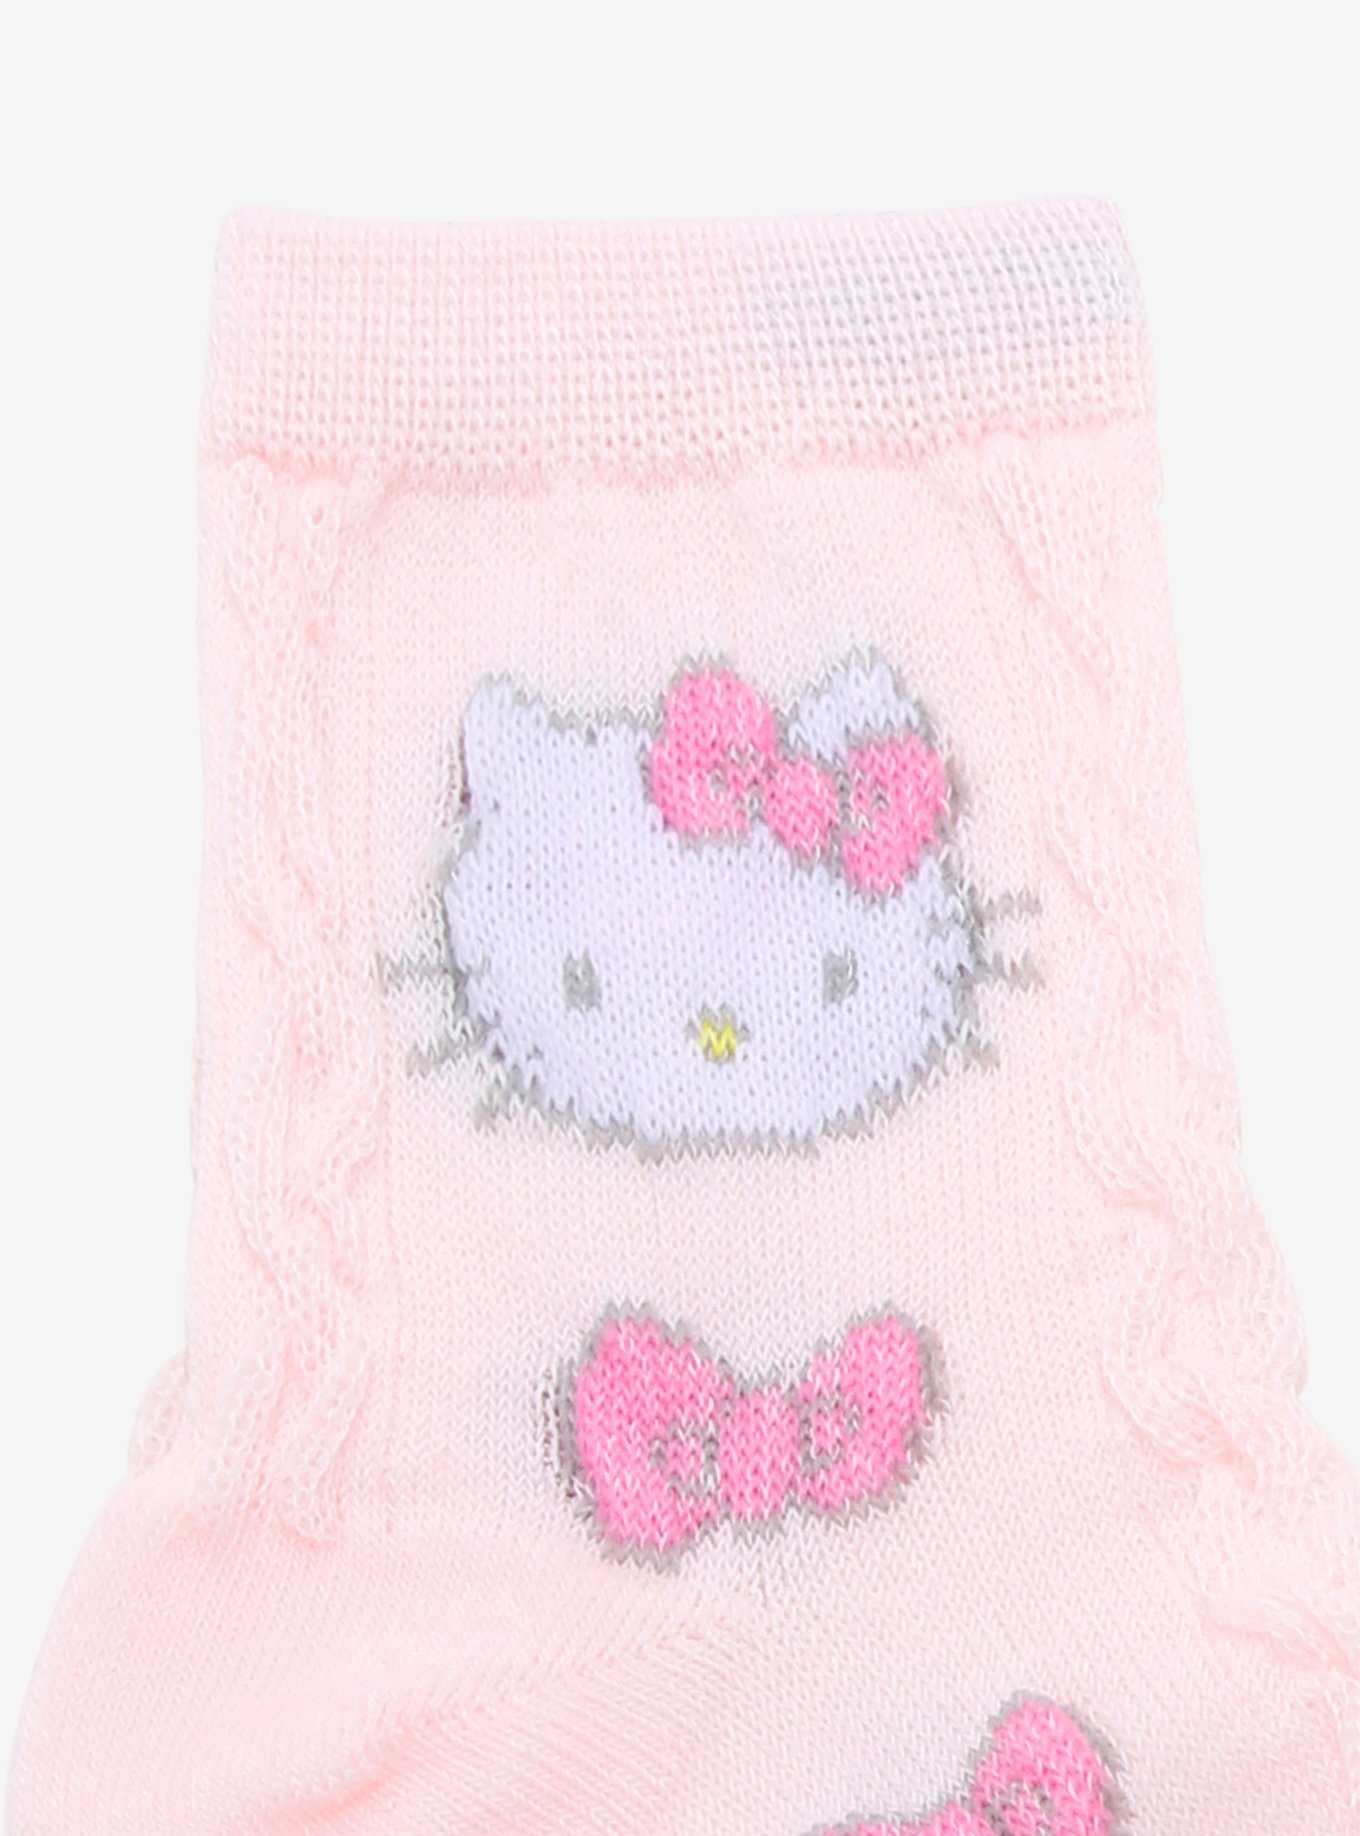 Hello Kitty Pink Bow Ankle Socks, , hi-res